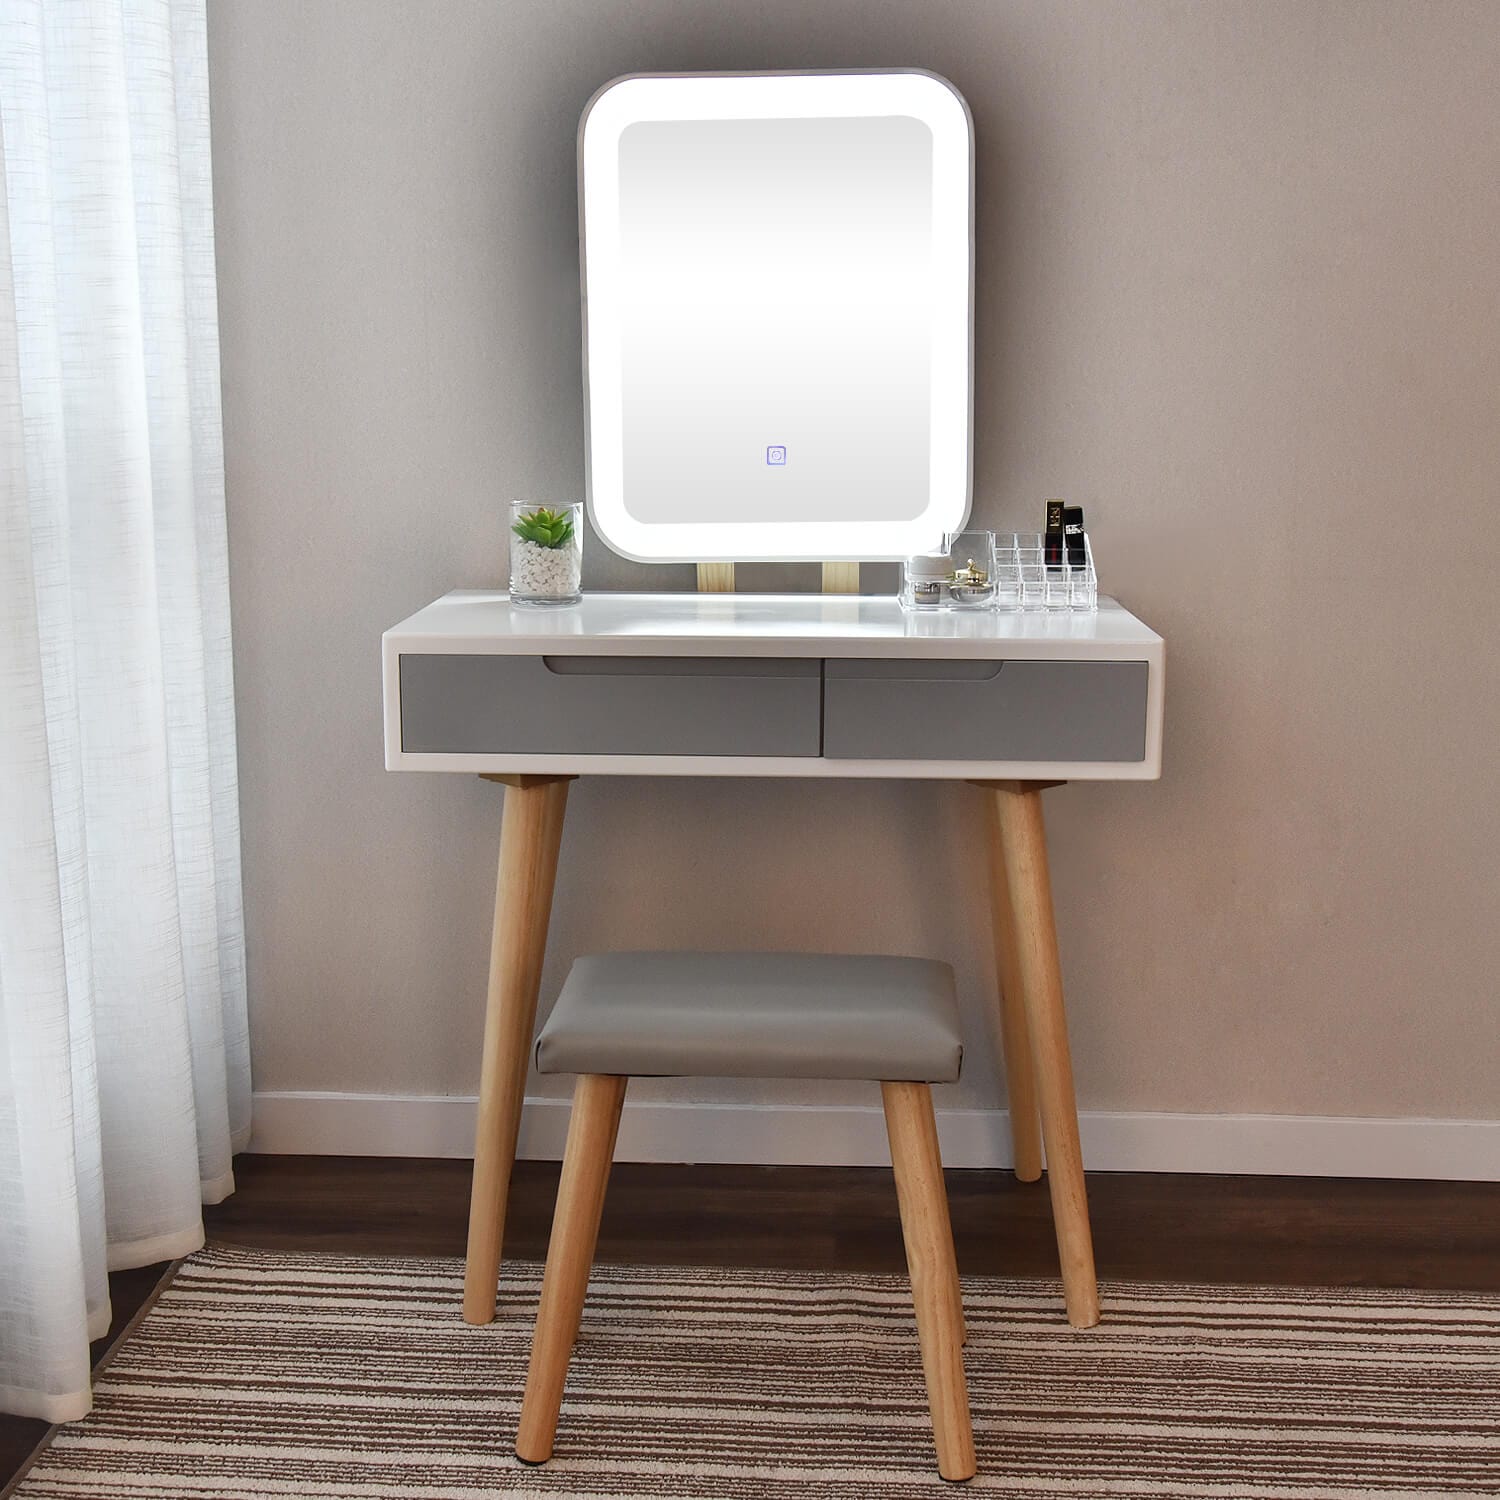 Elecwish makeup dressing table set with square mirror display